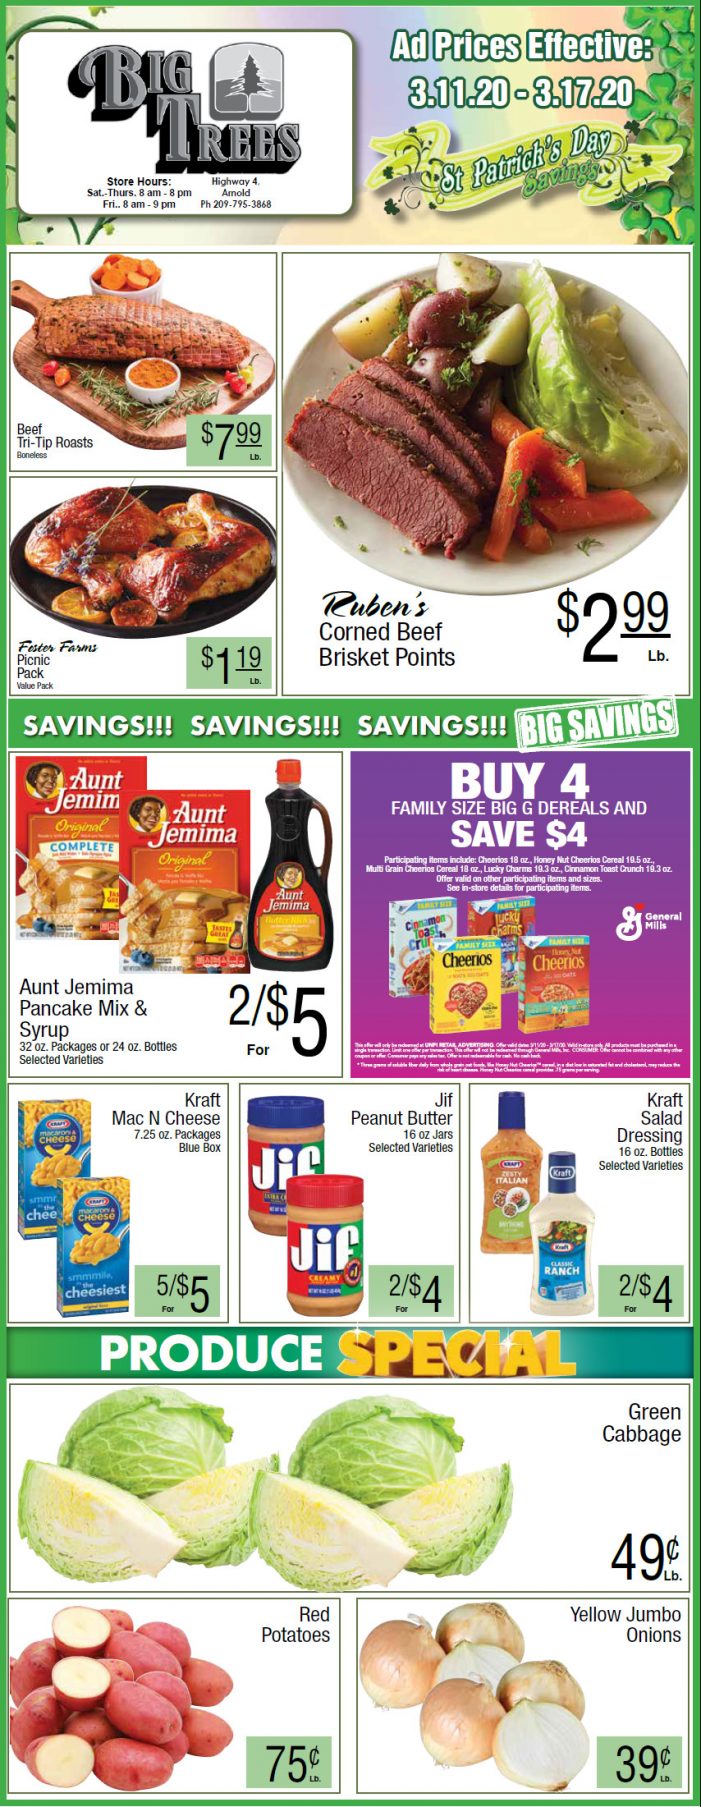 Big Trees Market Weekly Ad & Grocery Specials Through March 17th